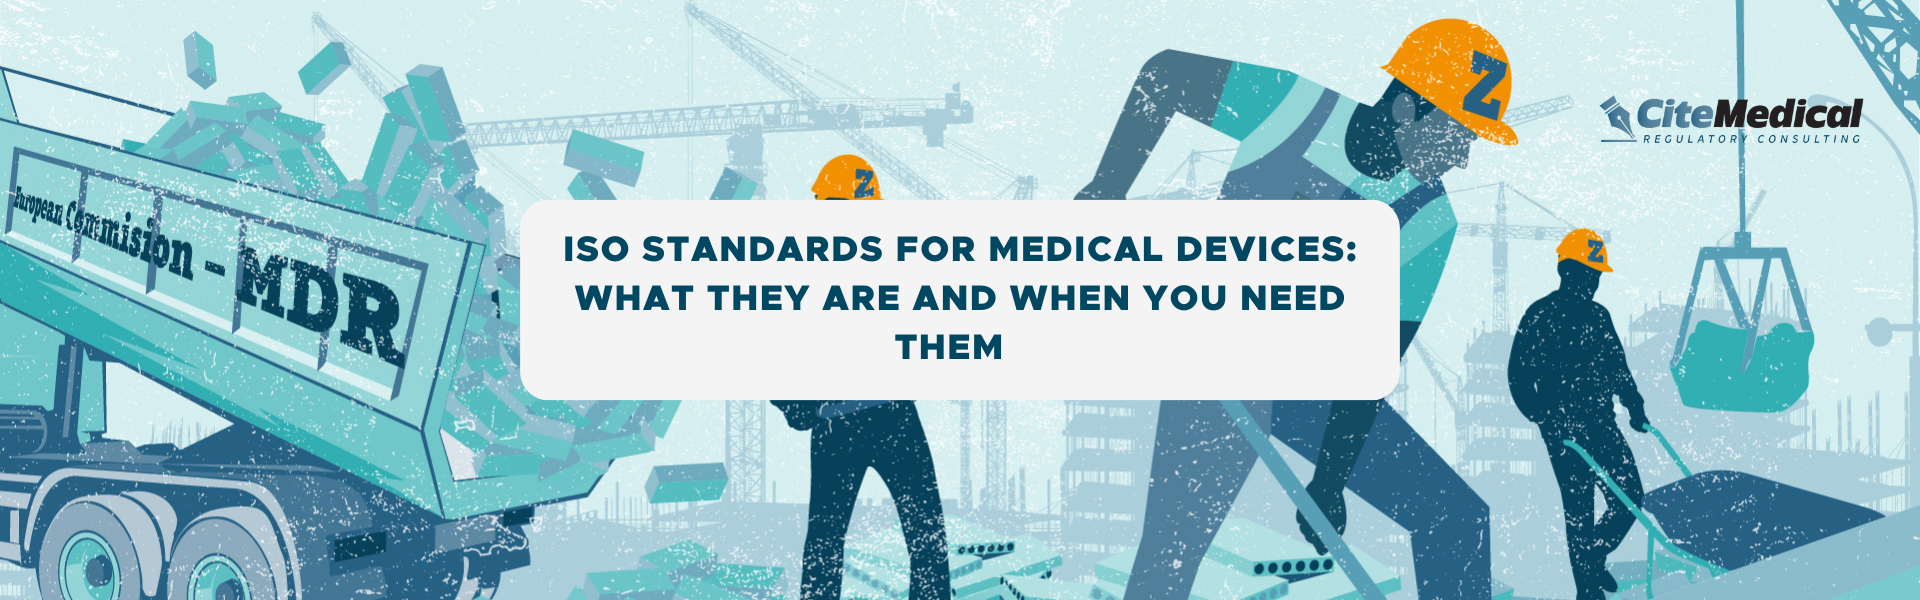 ISO Standards for Medical Devices